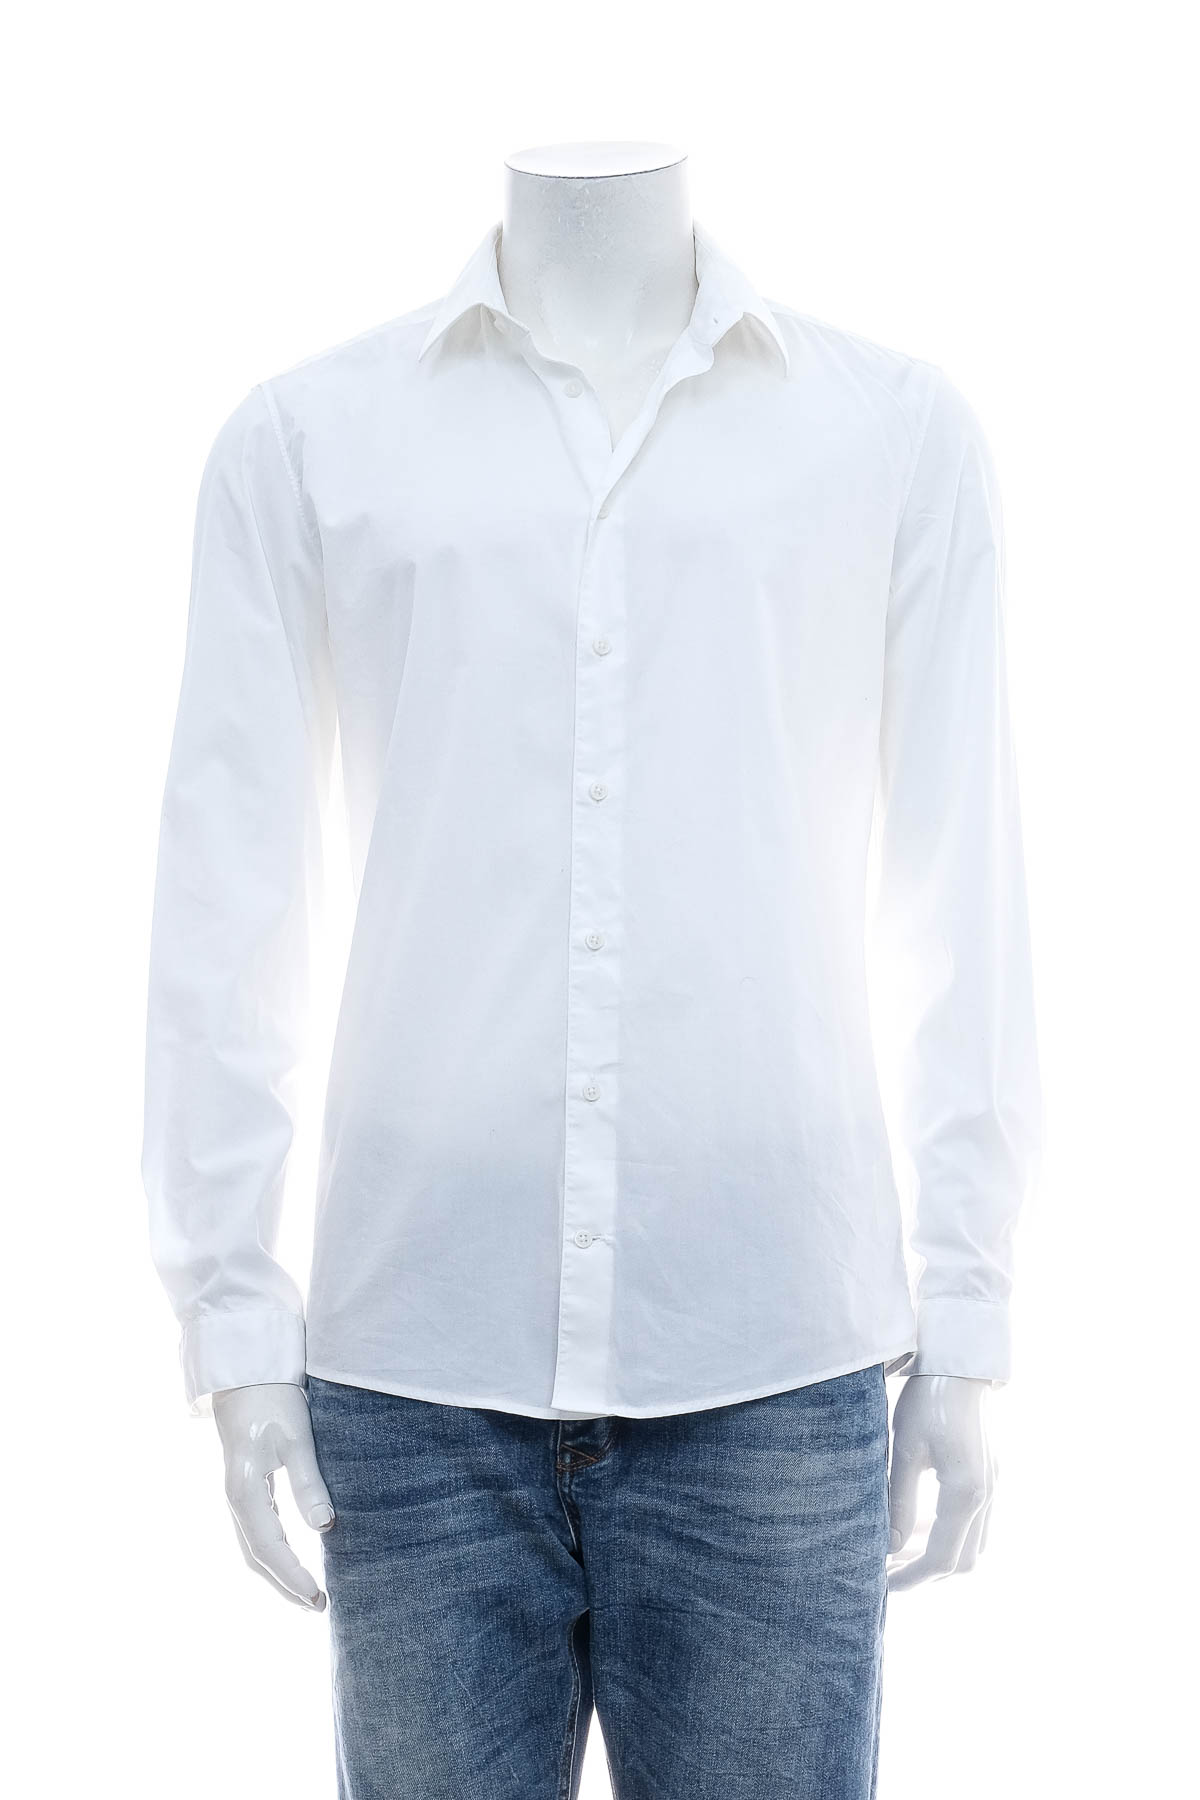 Men's shirt - DRYKORN FOR BEAUTIFUL PEOPLE - 0